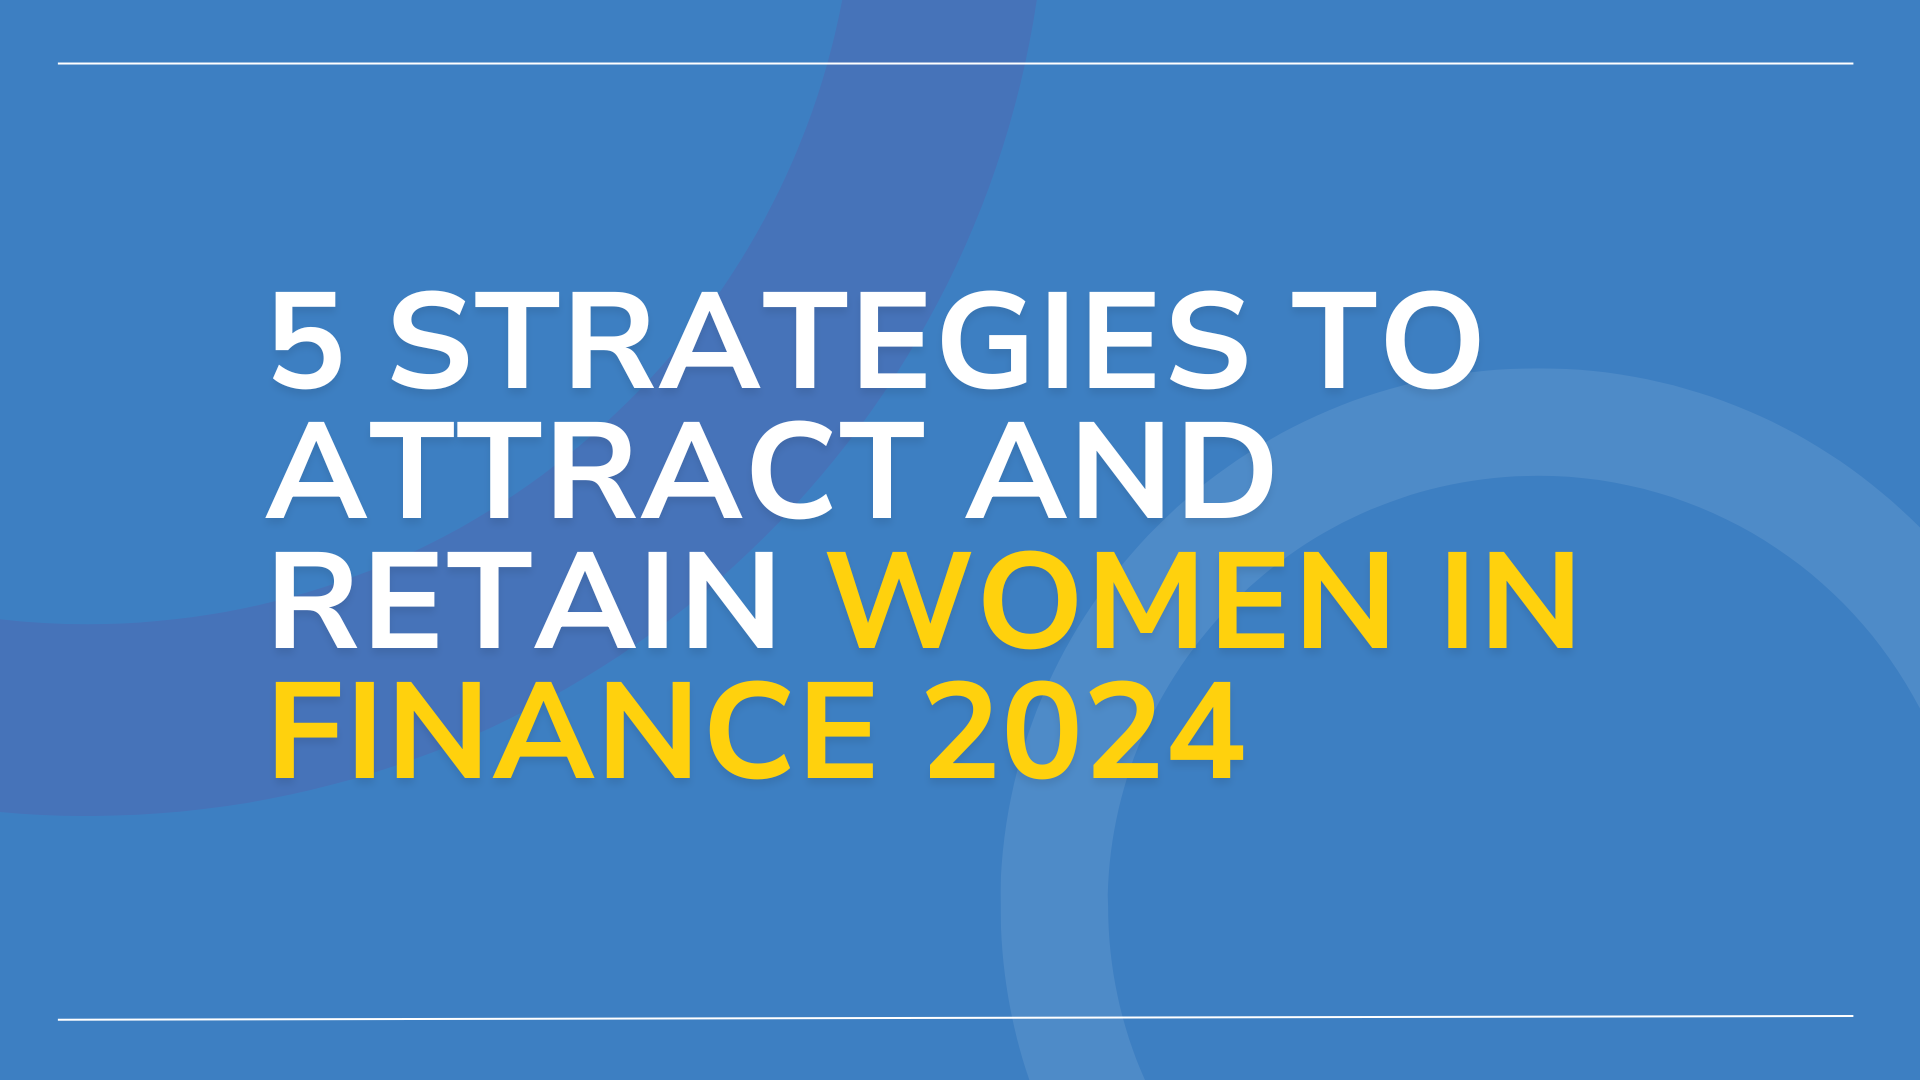 5 Strategies to Attract and Retain Women in Finance 2024